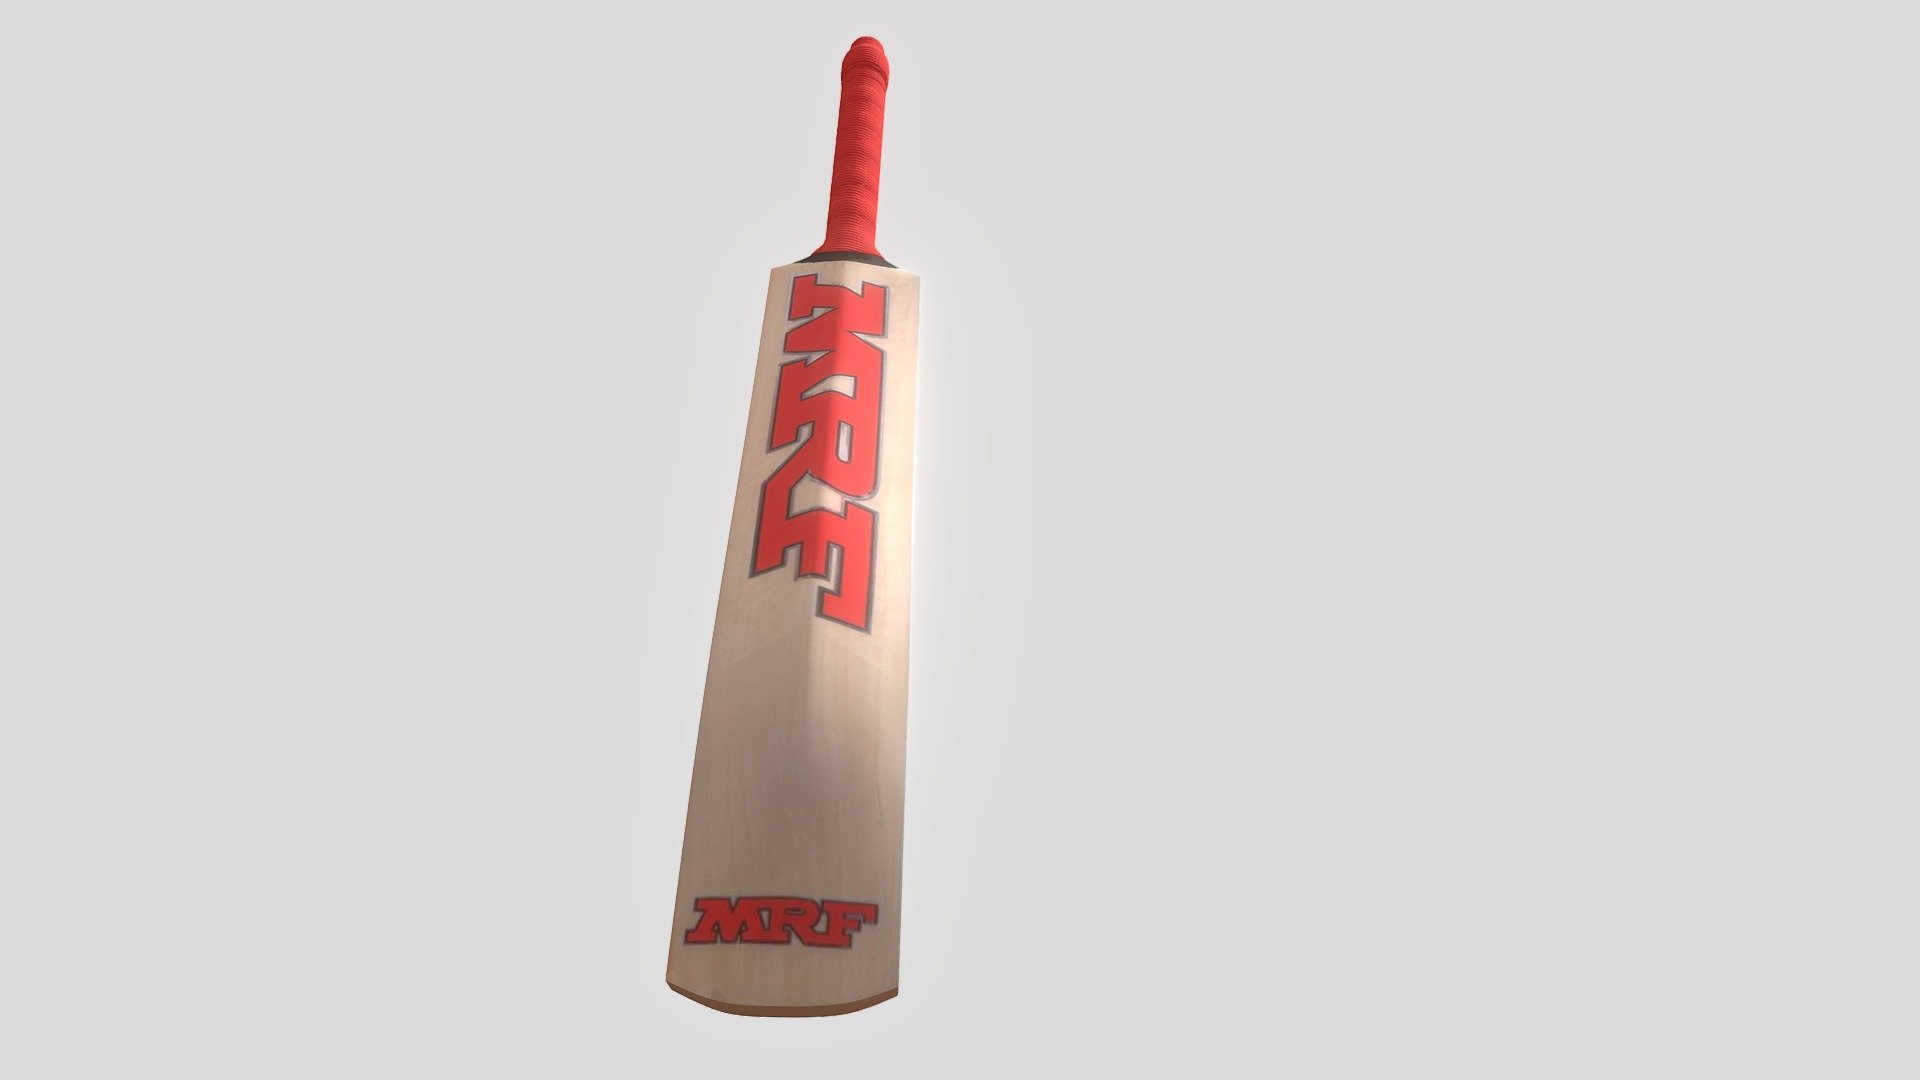 MRF Cricket Bat Created inside Blender 3.3.1 and exported as Obj file
- UV Unwrapped &amp; Textures baked
- 2K Diffuse &amp; Normal Jpeg Textures Included
- It contains 15586 vertices &amp; 15584 faces - MRF Cricket Bat - 3D model by Arun SV (@Arunsvfx) 3d model